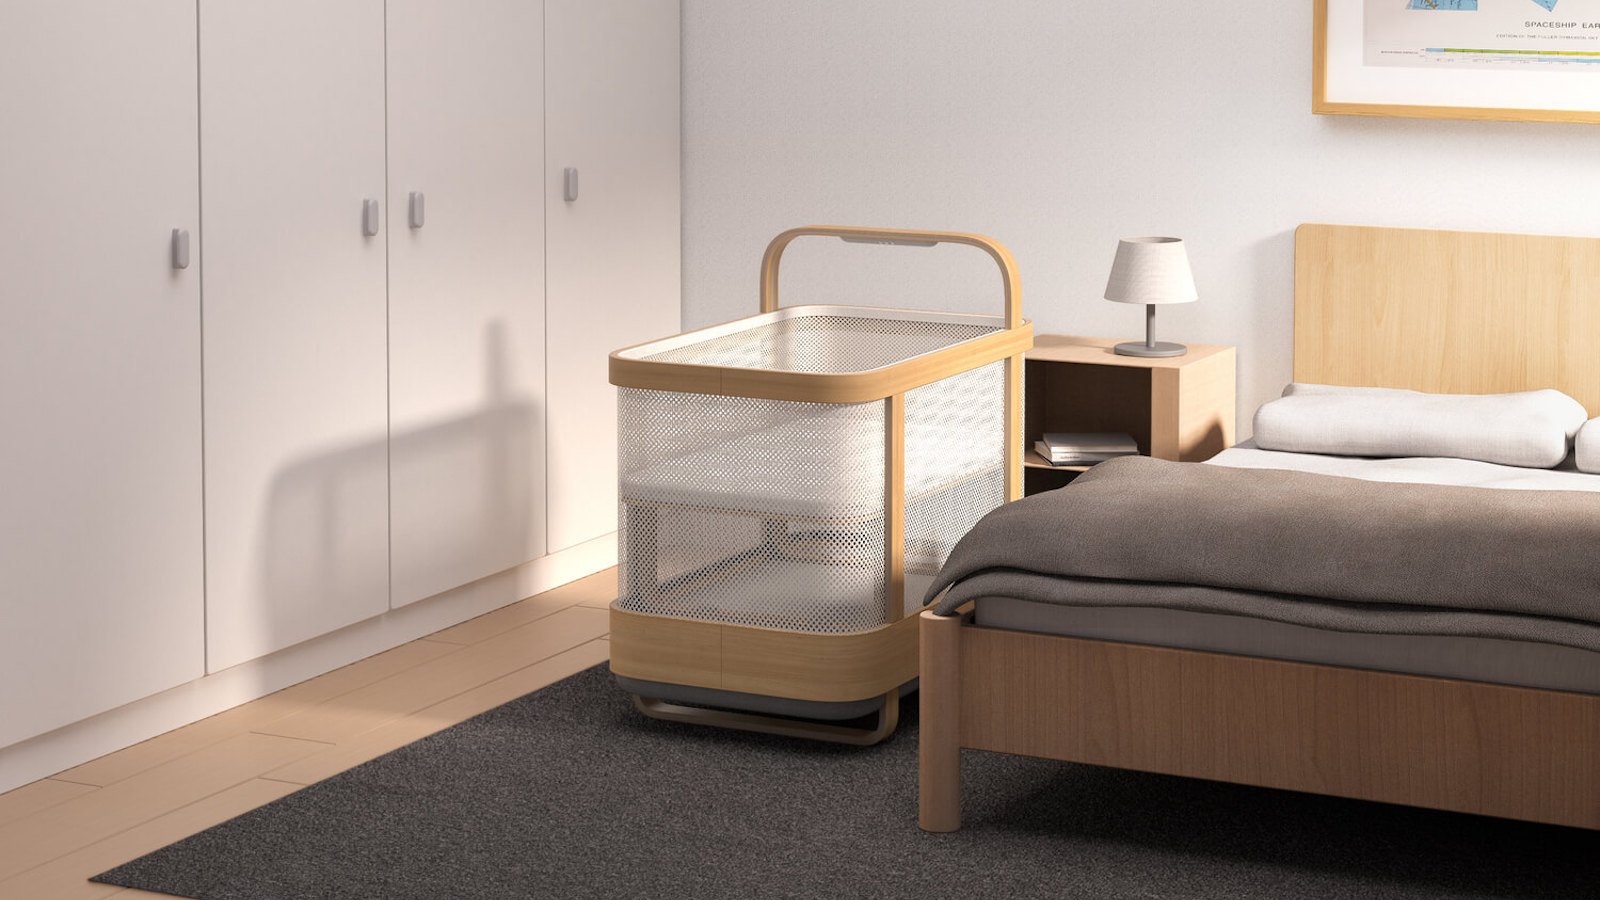 Cradlewise Smart Crib is a crib, bassinet, and baby monitor in-one